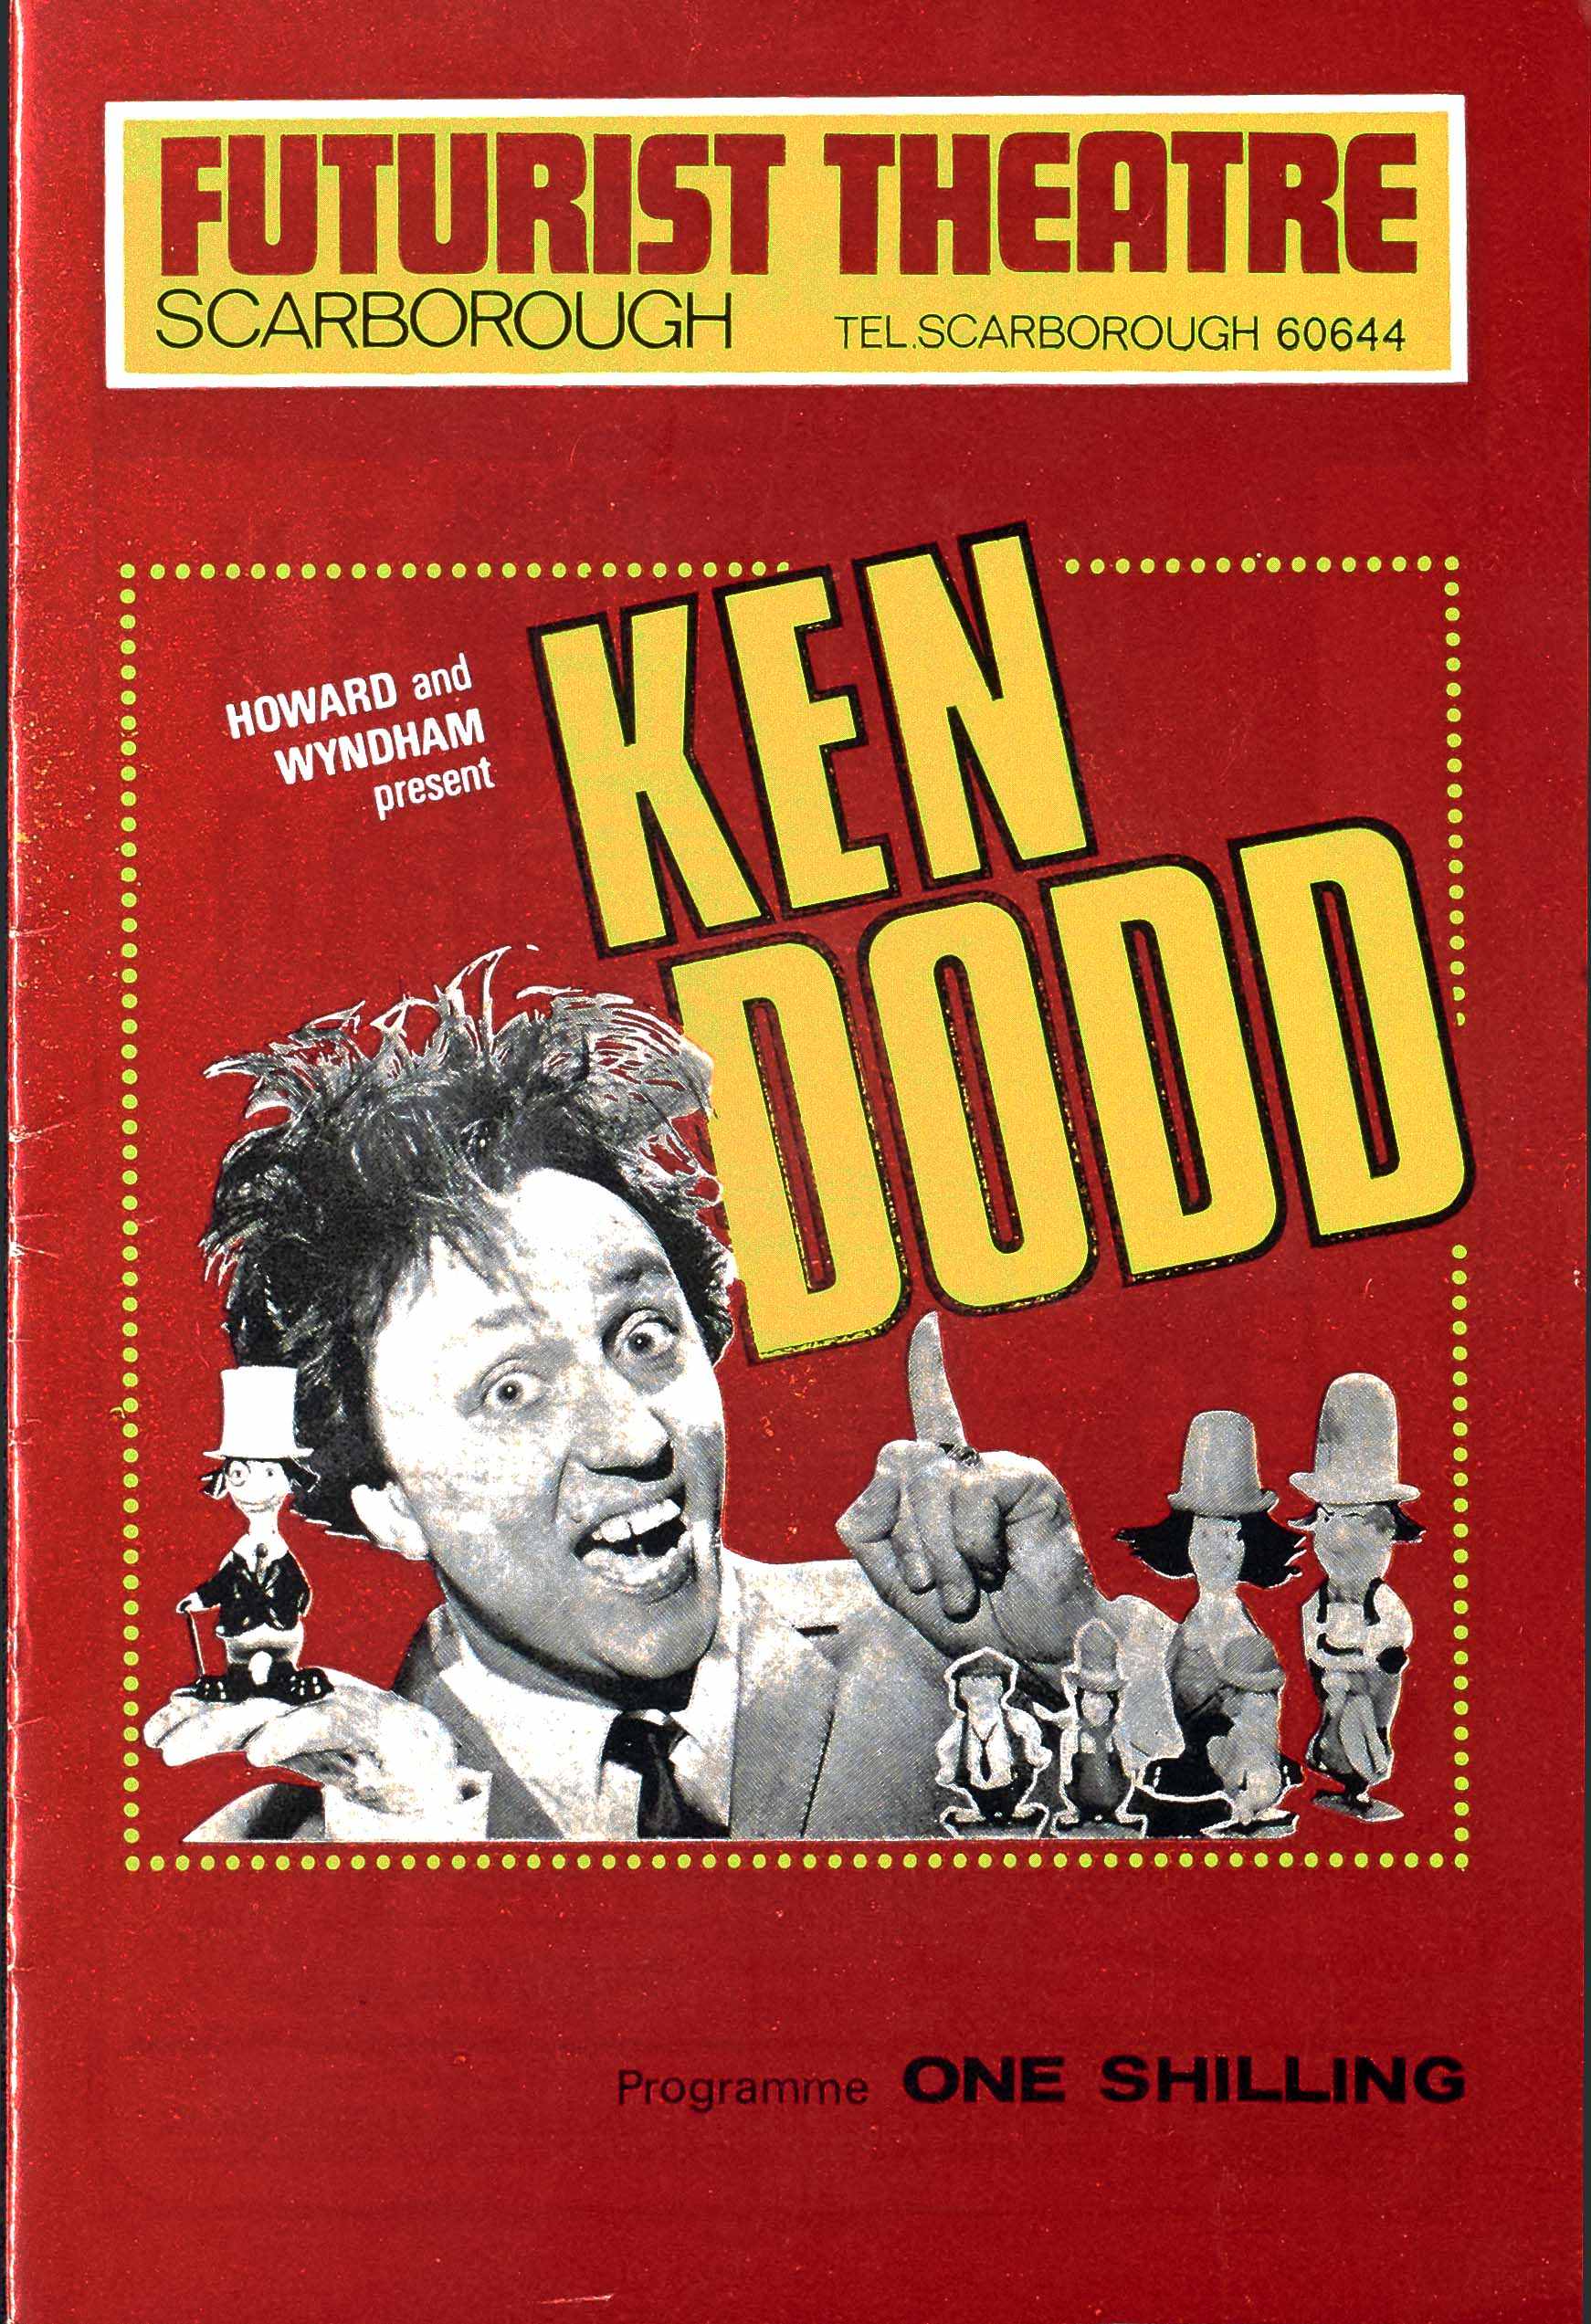 Programmes for performances at the Futurist Theatre, Scarborough, featuring Ken Dodd and the Startime show of 1974